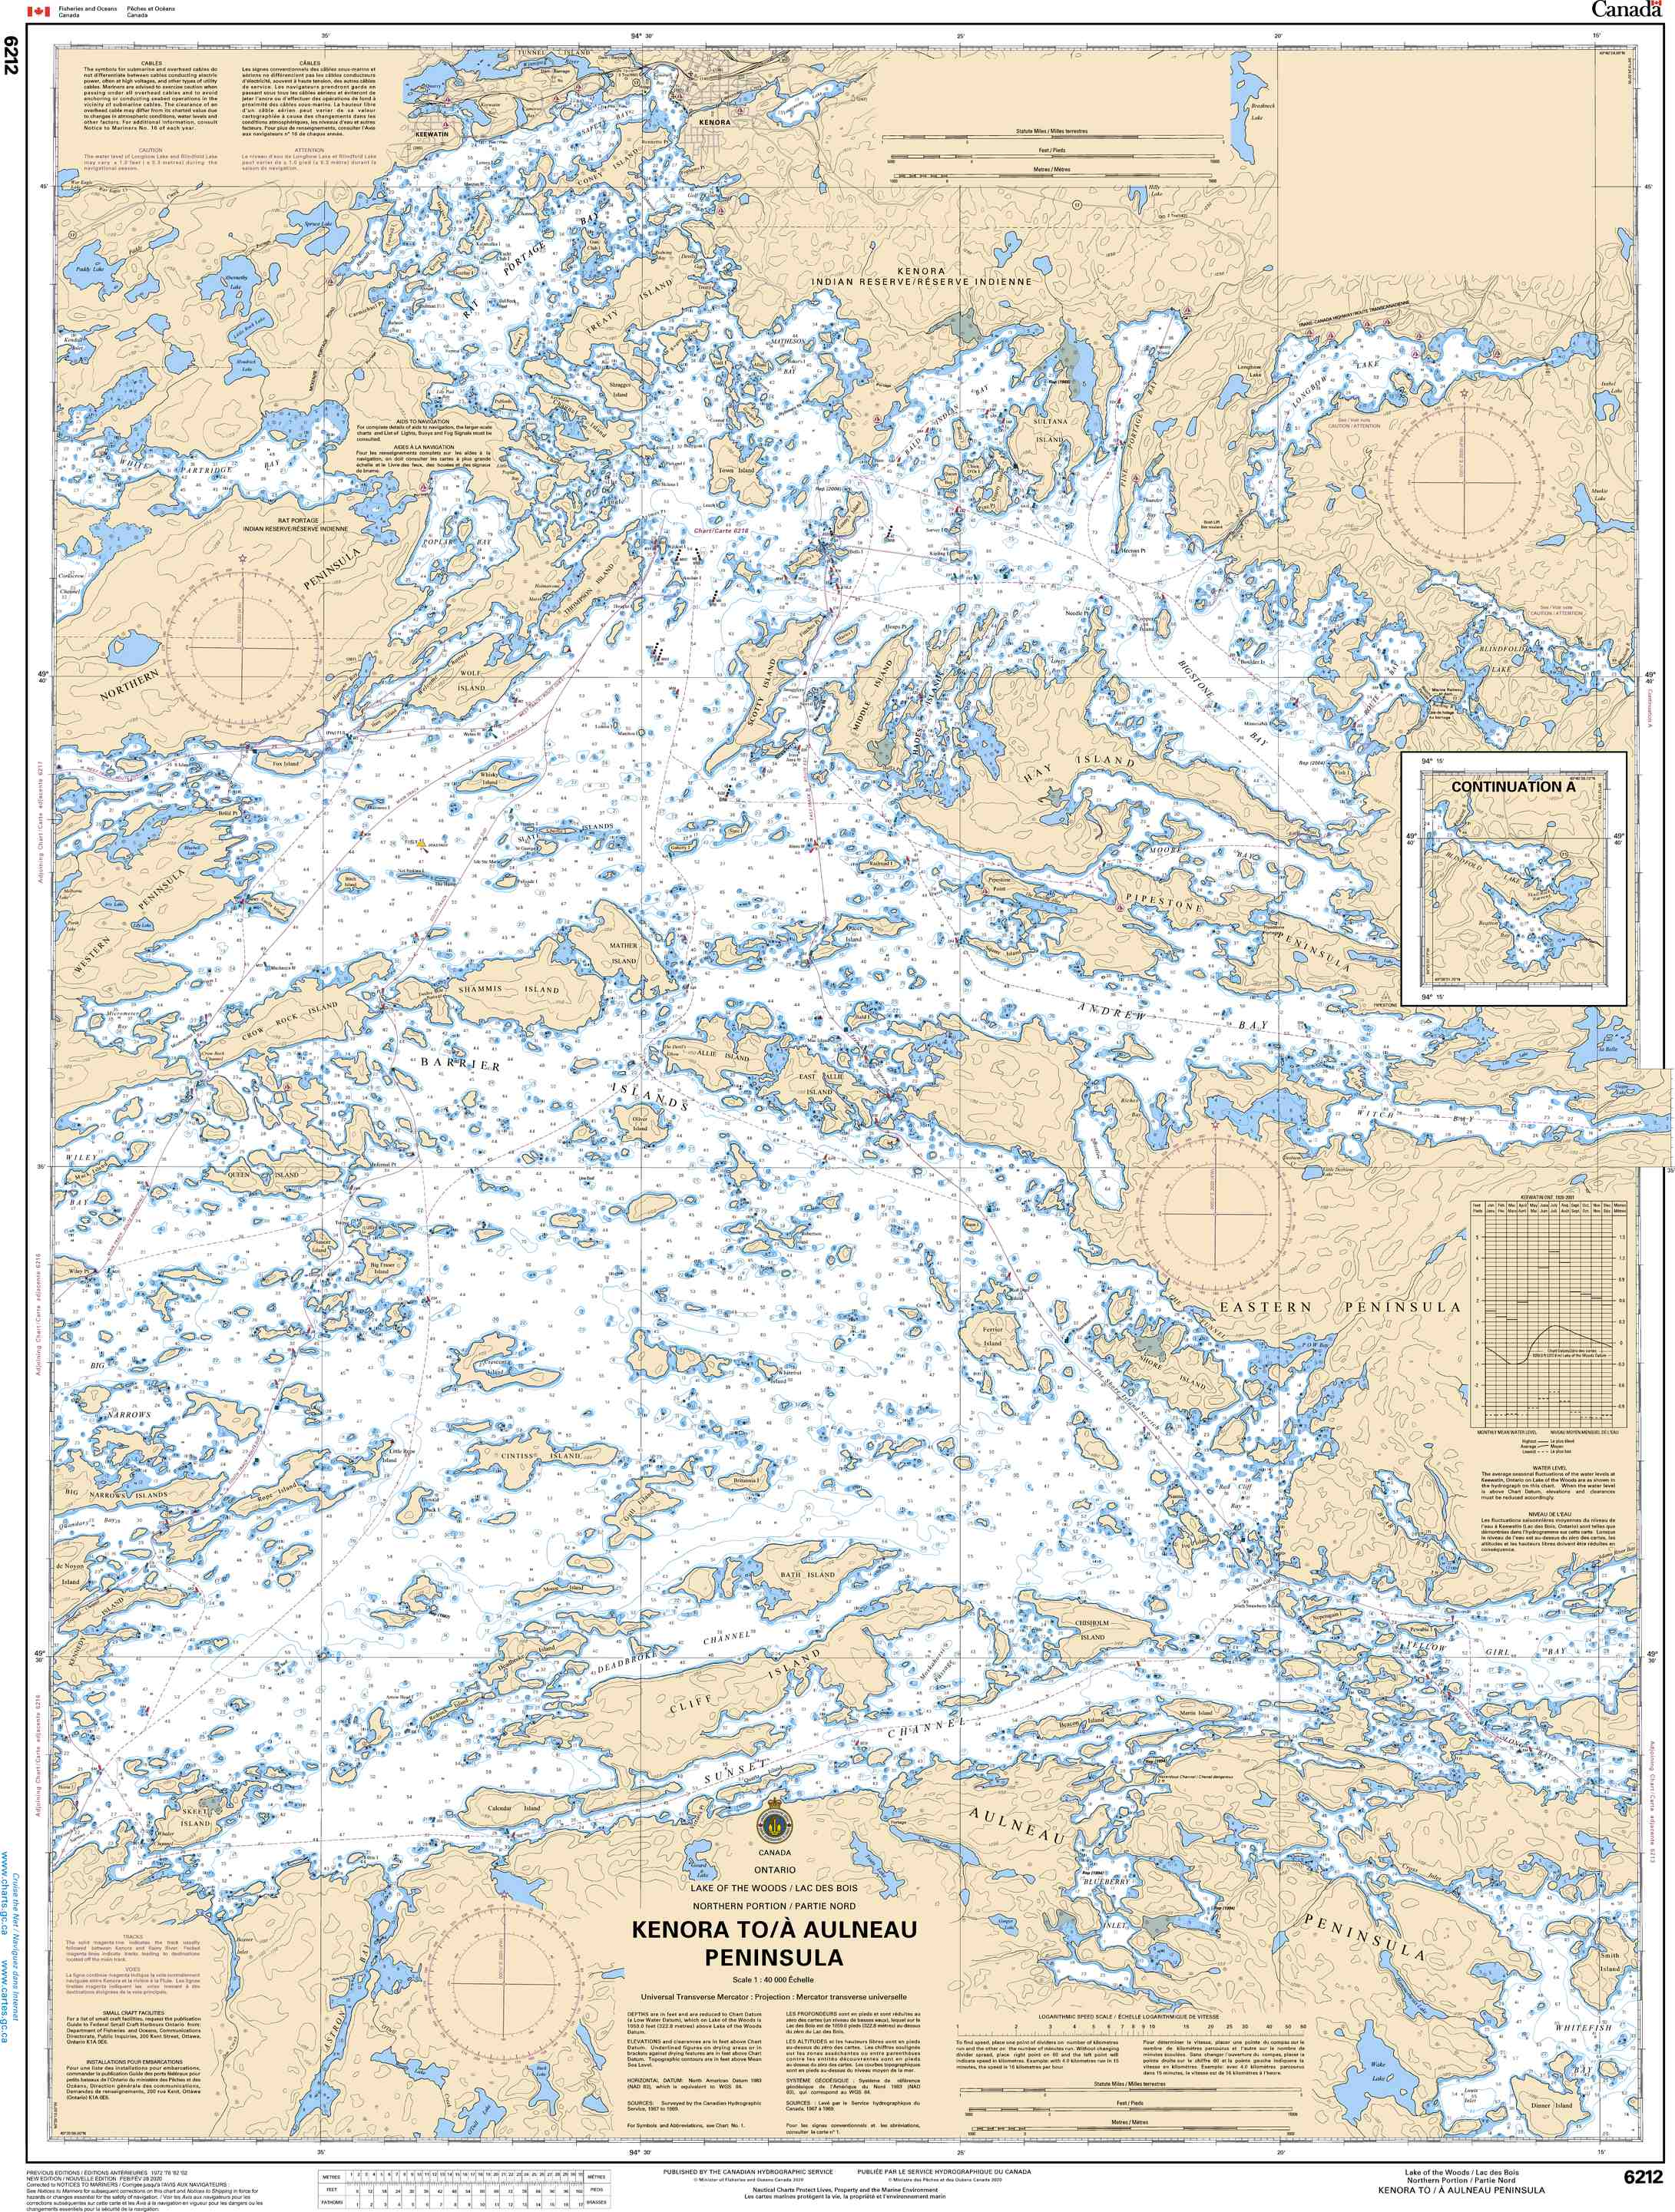 Canadian Hydrographic Service Nautical Chart CHS6212: Kenora to/à Aulneau Peninsula (Northern Portion / Partie nord)